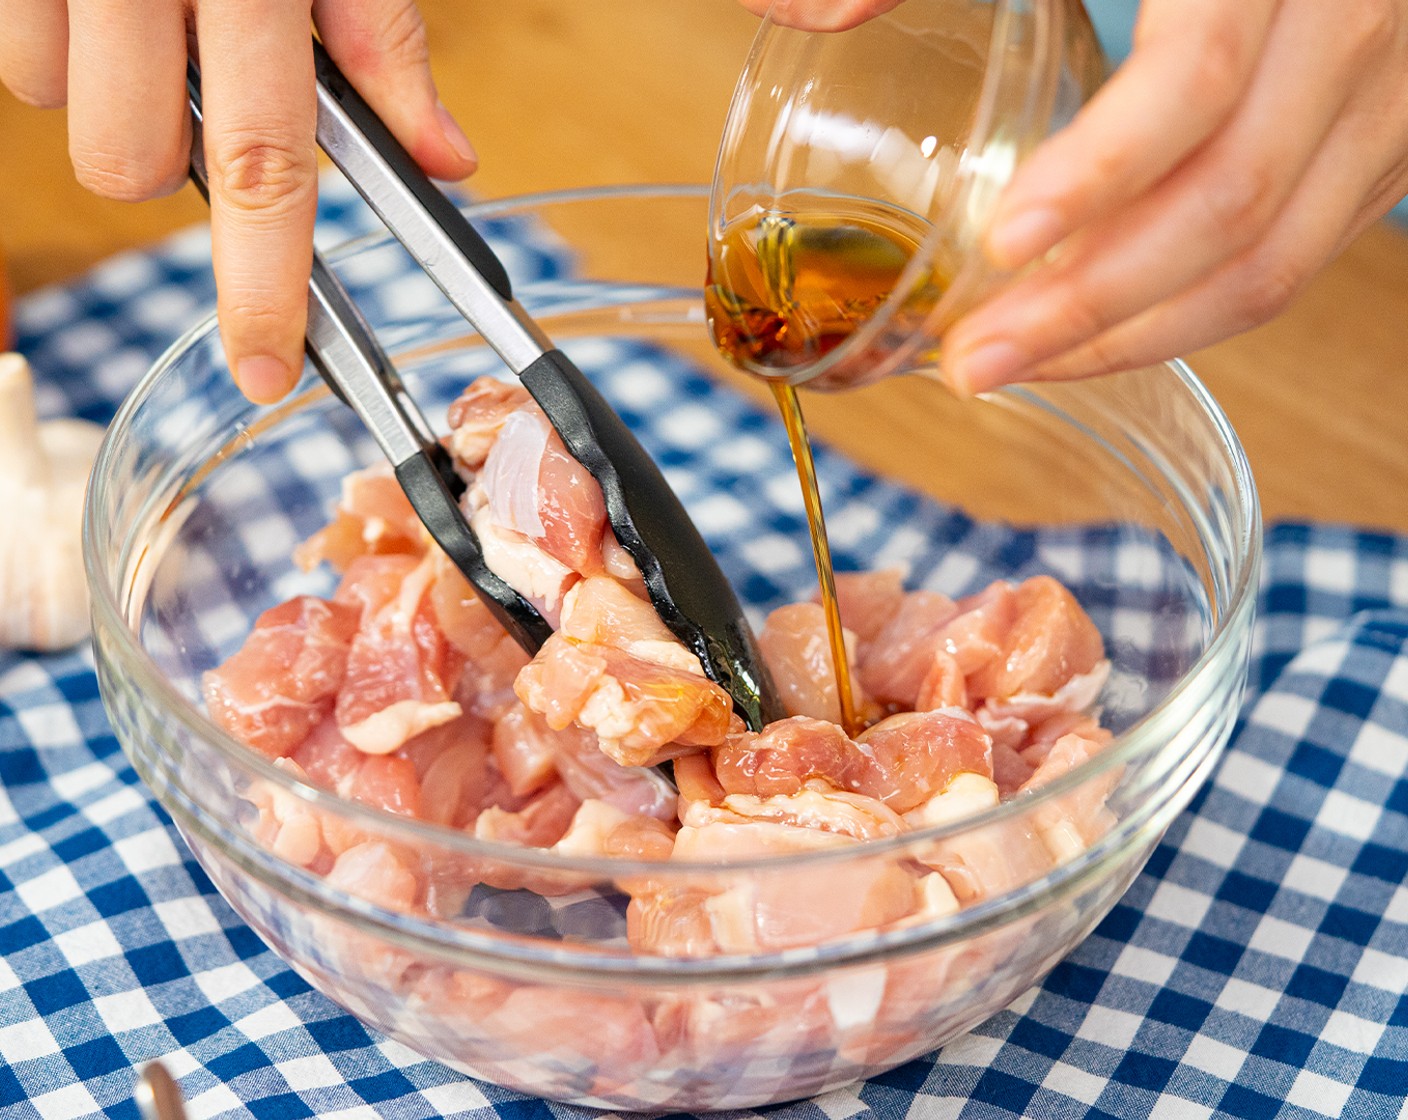 step 1 Cut Boneless, Skinless Chicken Thigh (1 lb) into bite-size pieces (around 1-inch). Add to a bowl with the Sesame Oil (1/2 Tbsp). Toss until well coated and set aside.